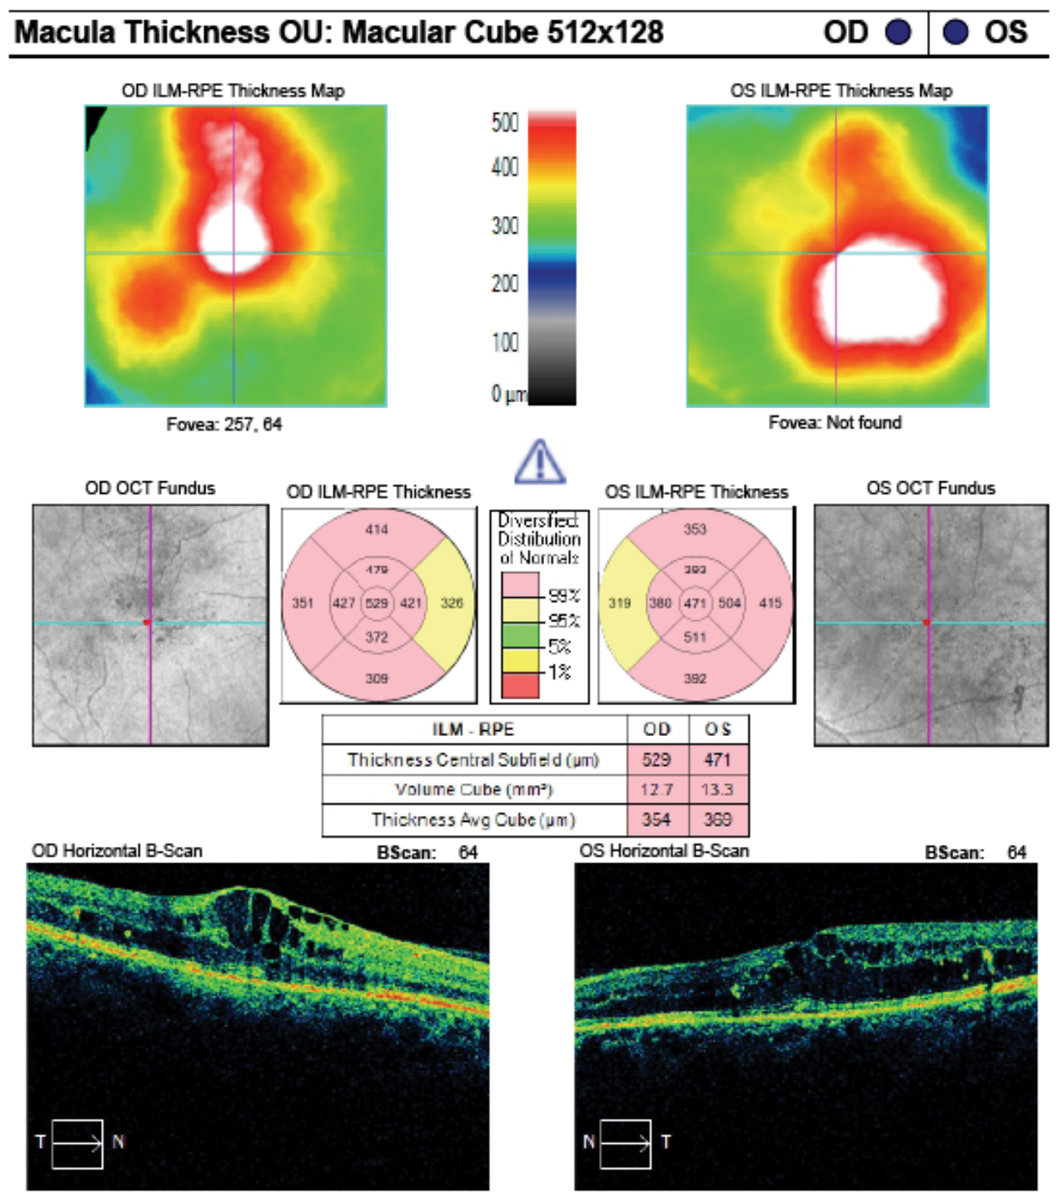 These macular cube analysis images of the same patient from the previous page shows clinically significant macular edema in both eyes.